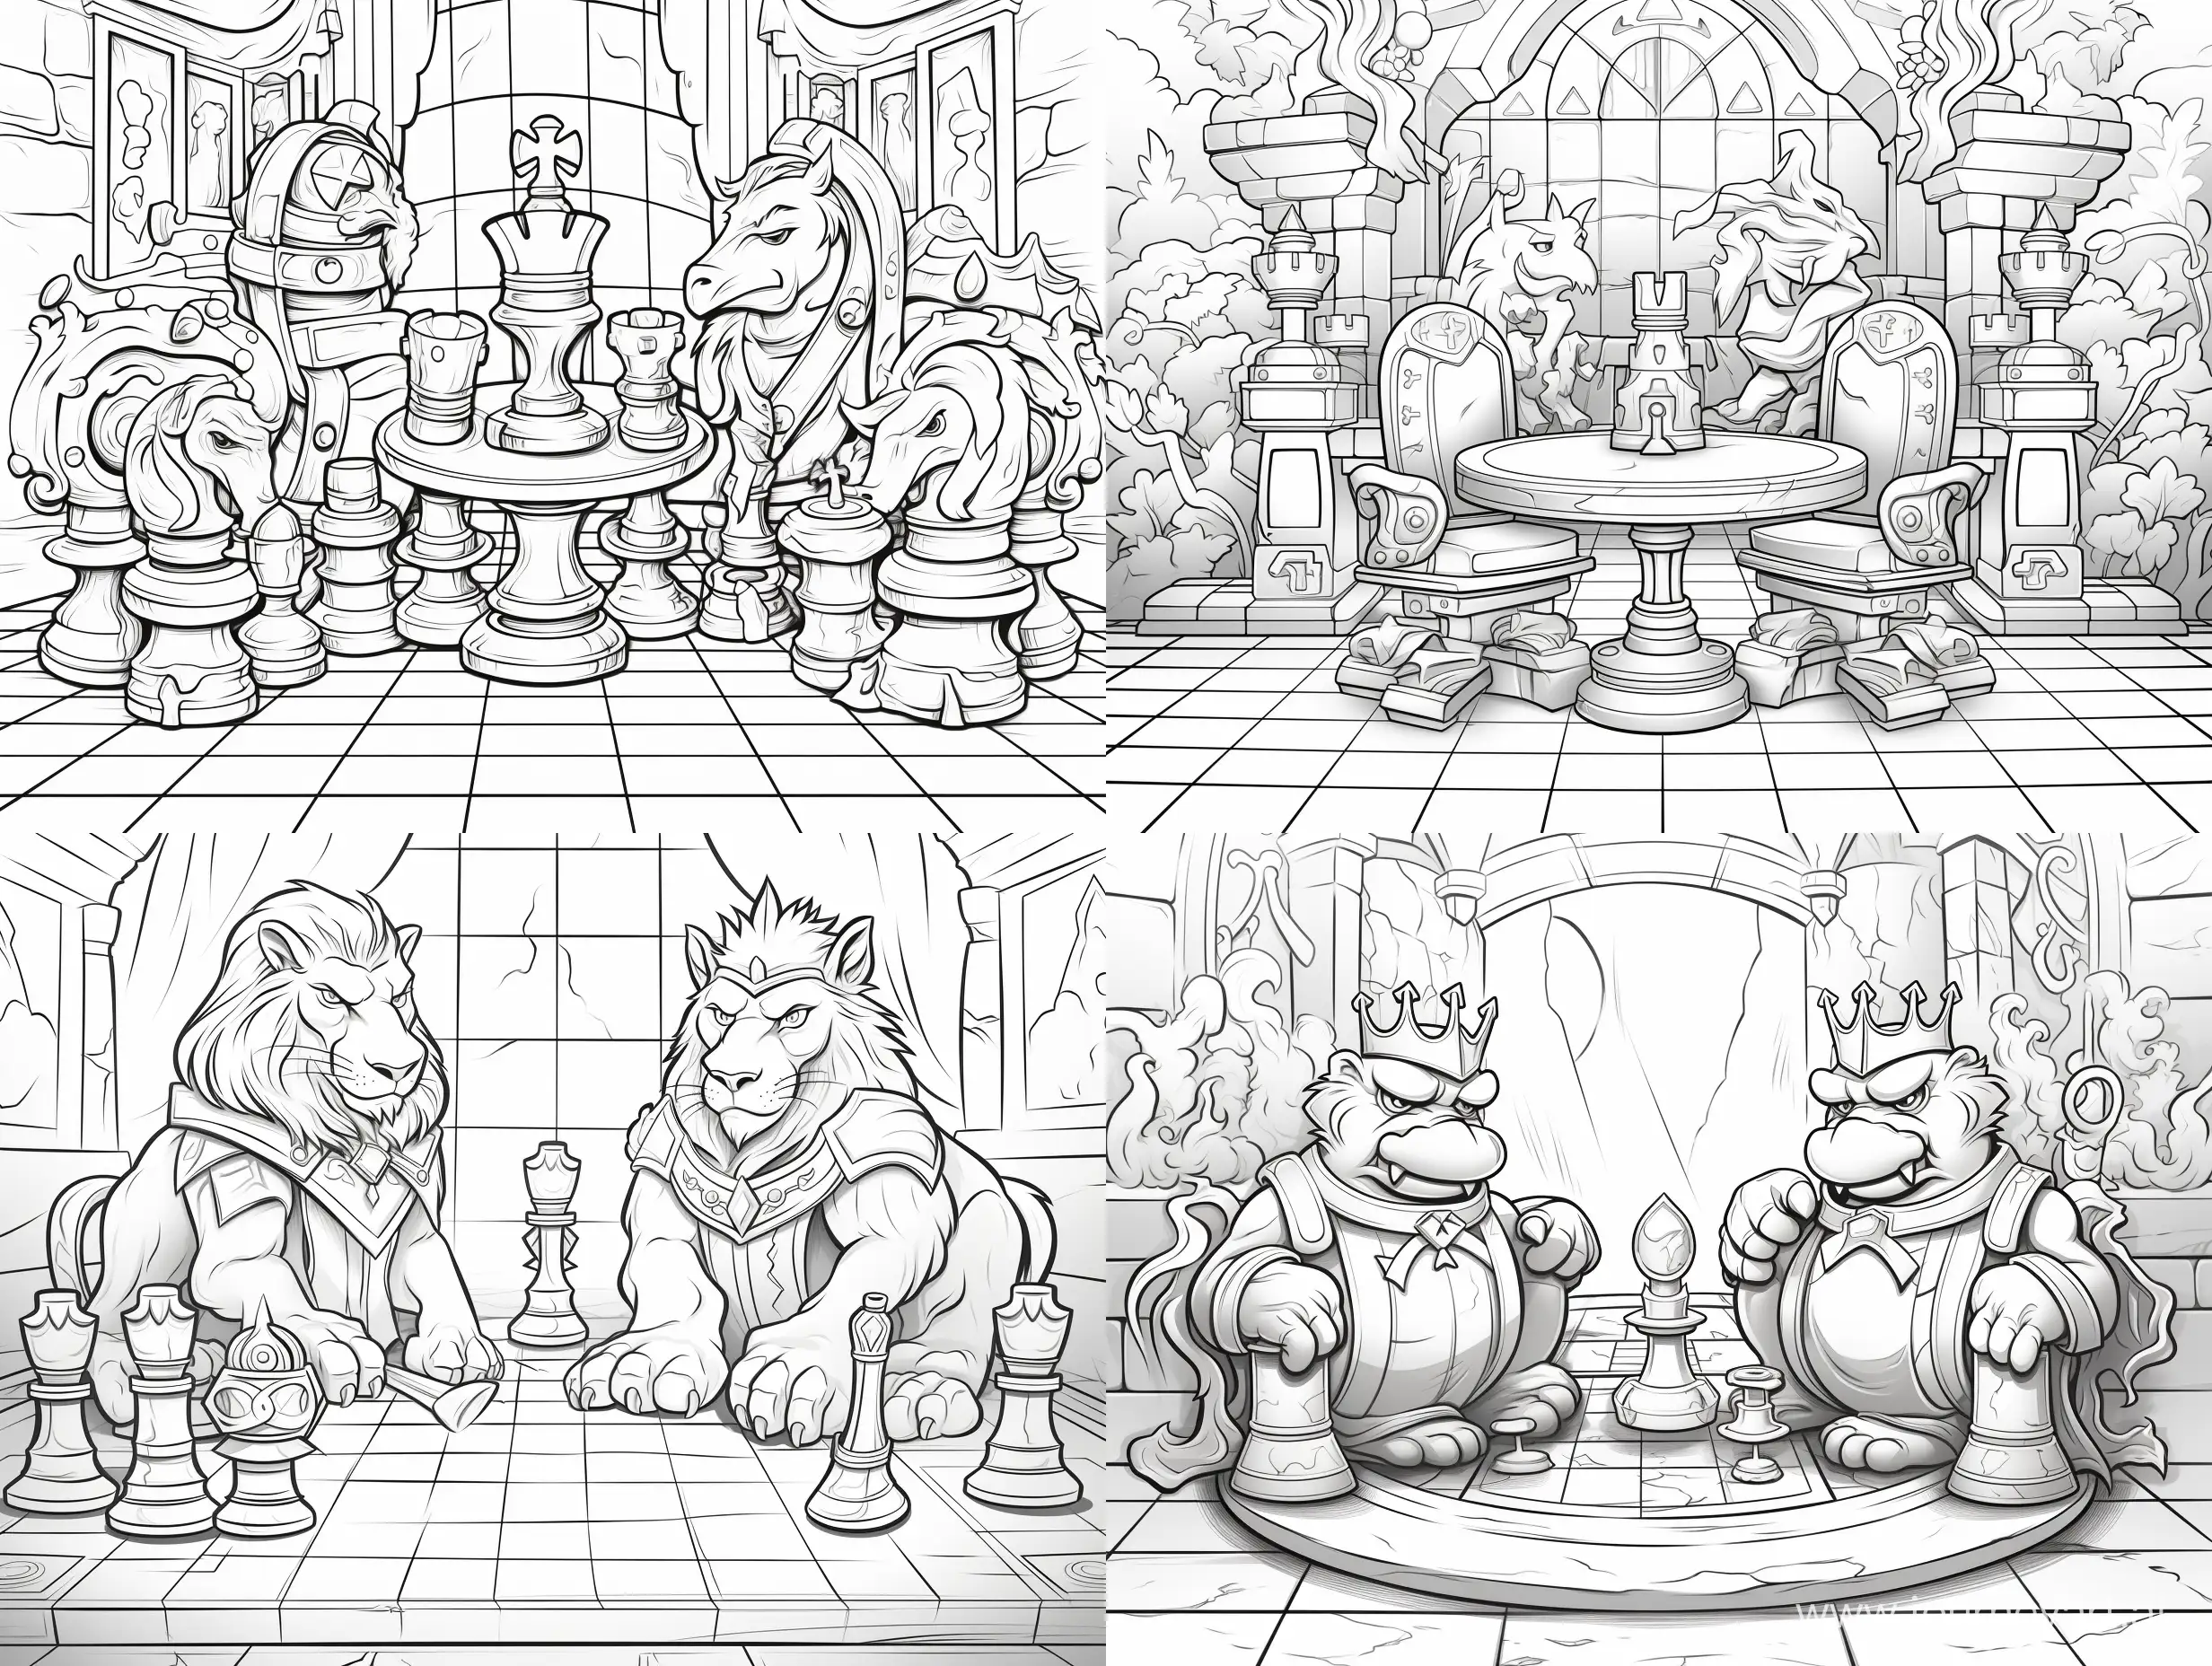 Cartoon-Chess-Kingdom-Coloring-Page-for-Kids-with-Low-Detail-and-Thick-Lines